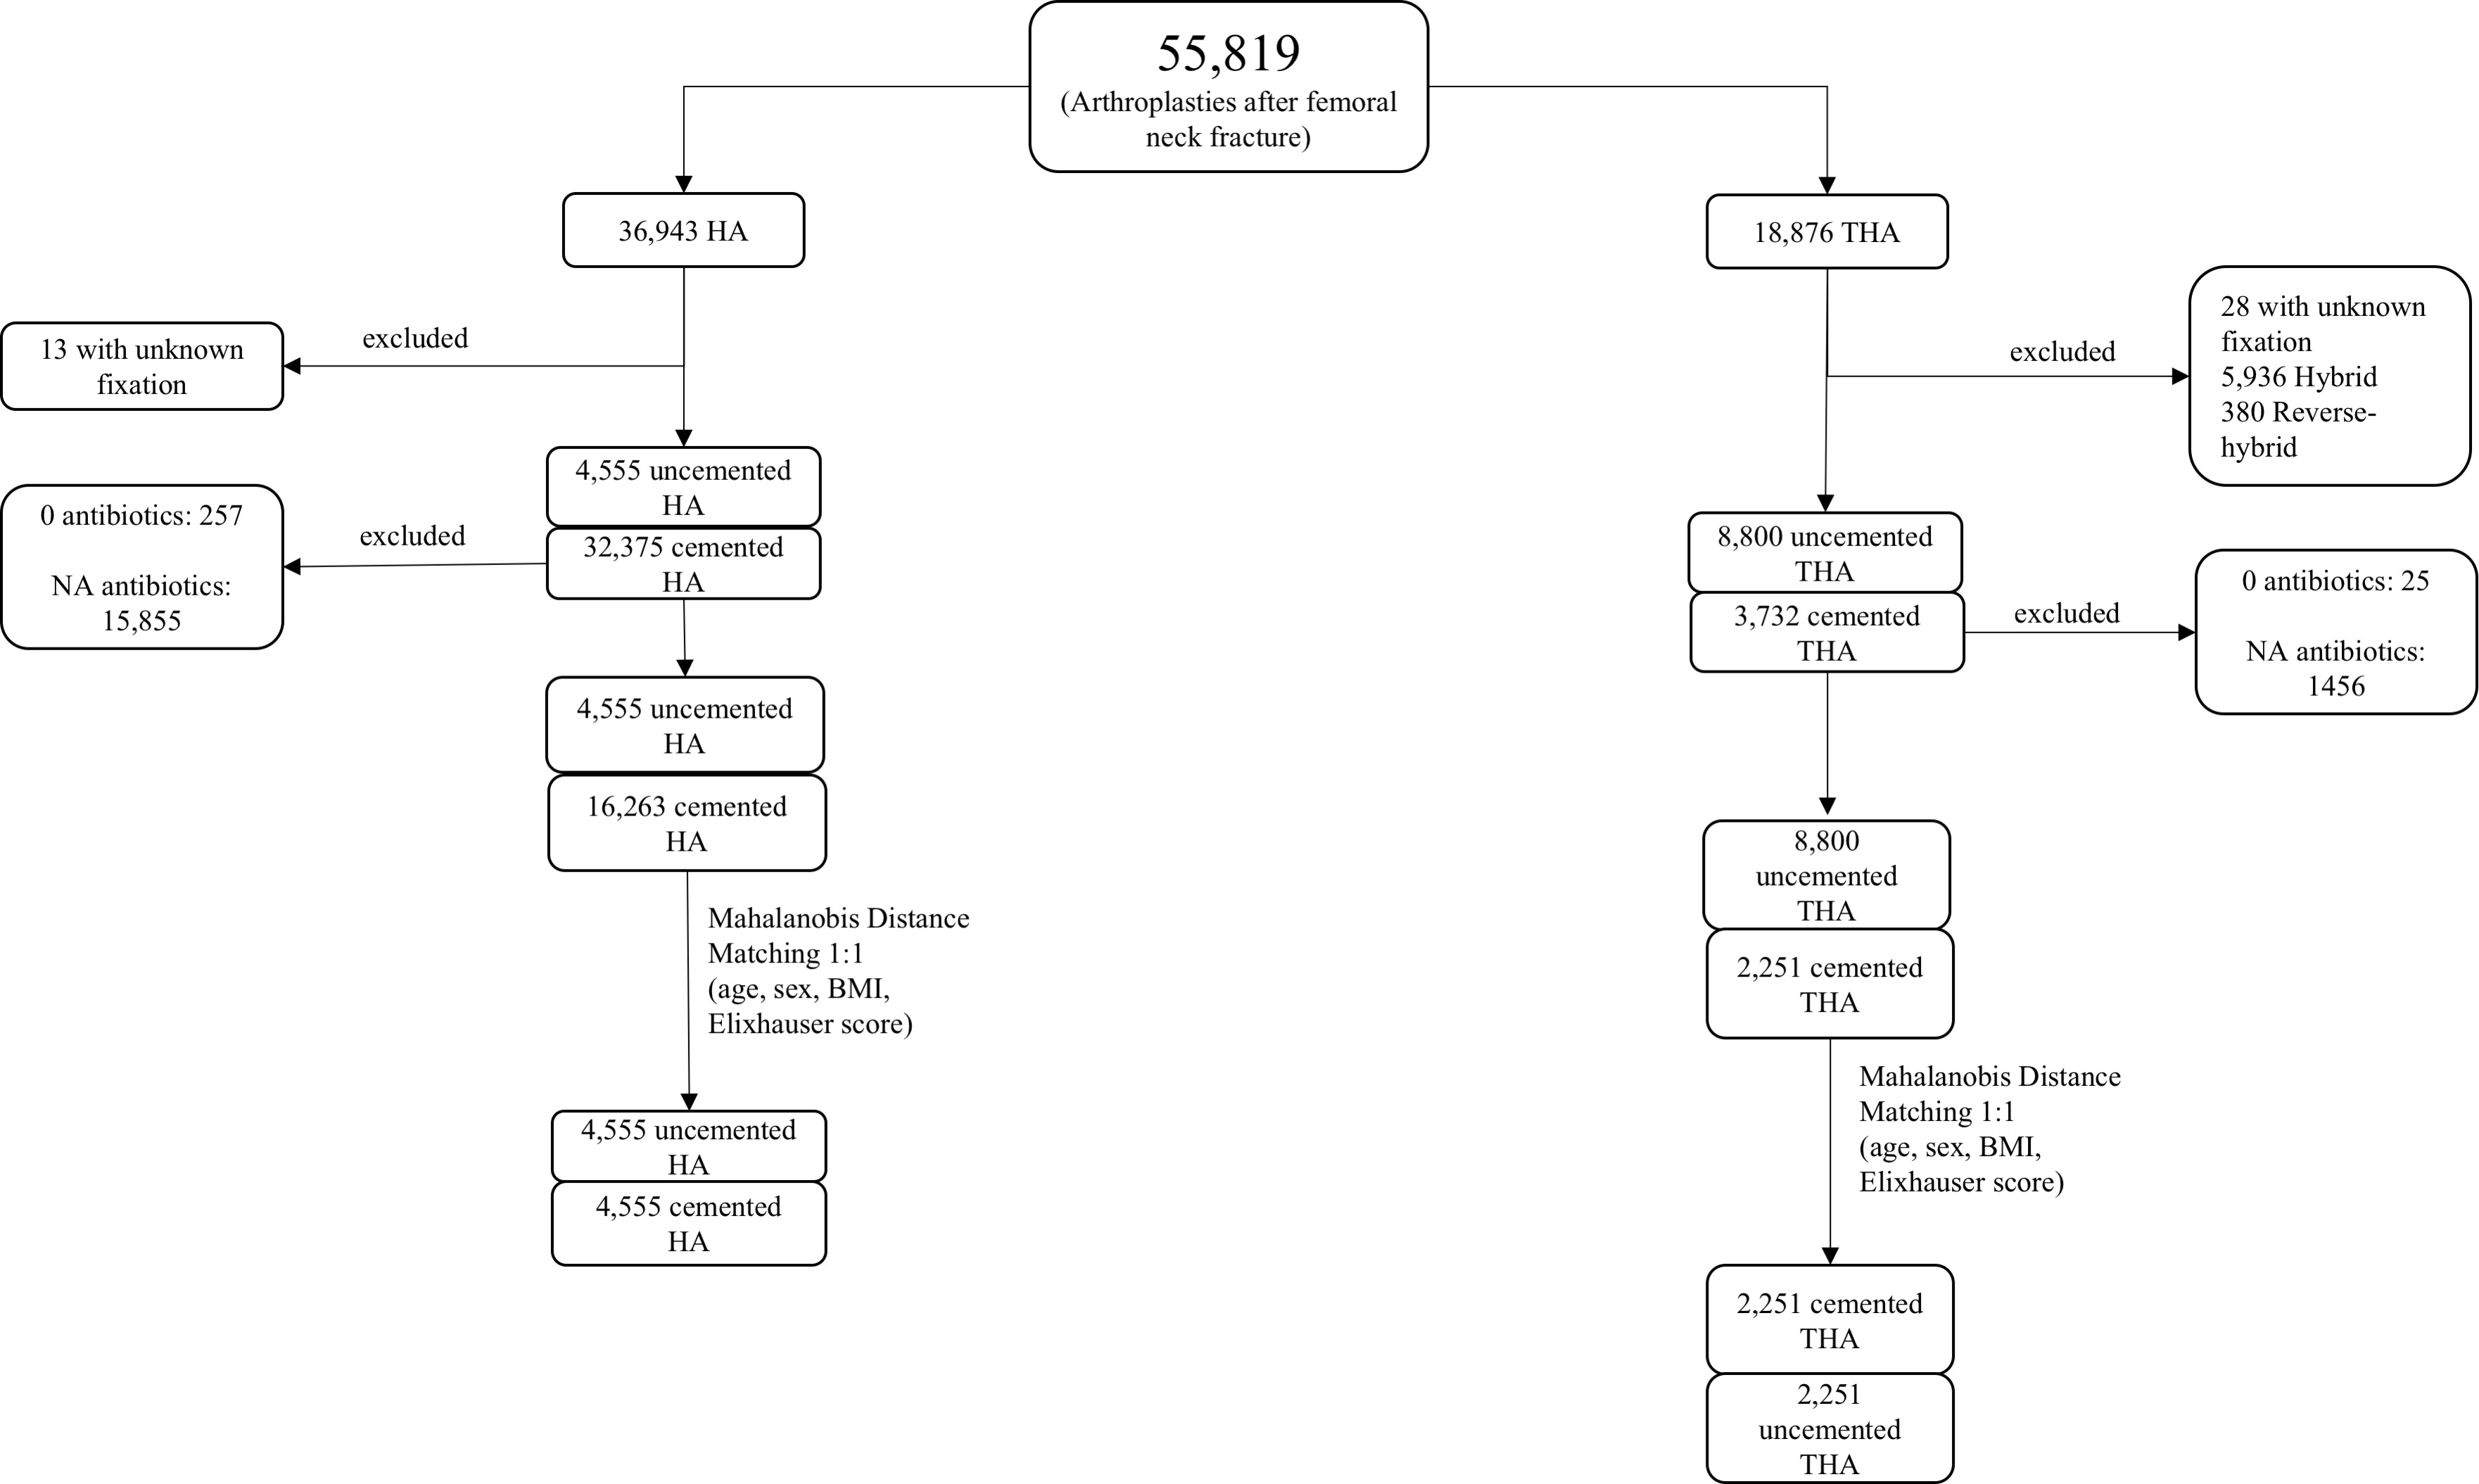 Fig. 1 
            Flowchart with composition of the study population. HA, hemiarthroplasty; N/A, not available; THA, total hip arthroplasty.
          